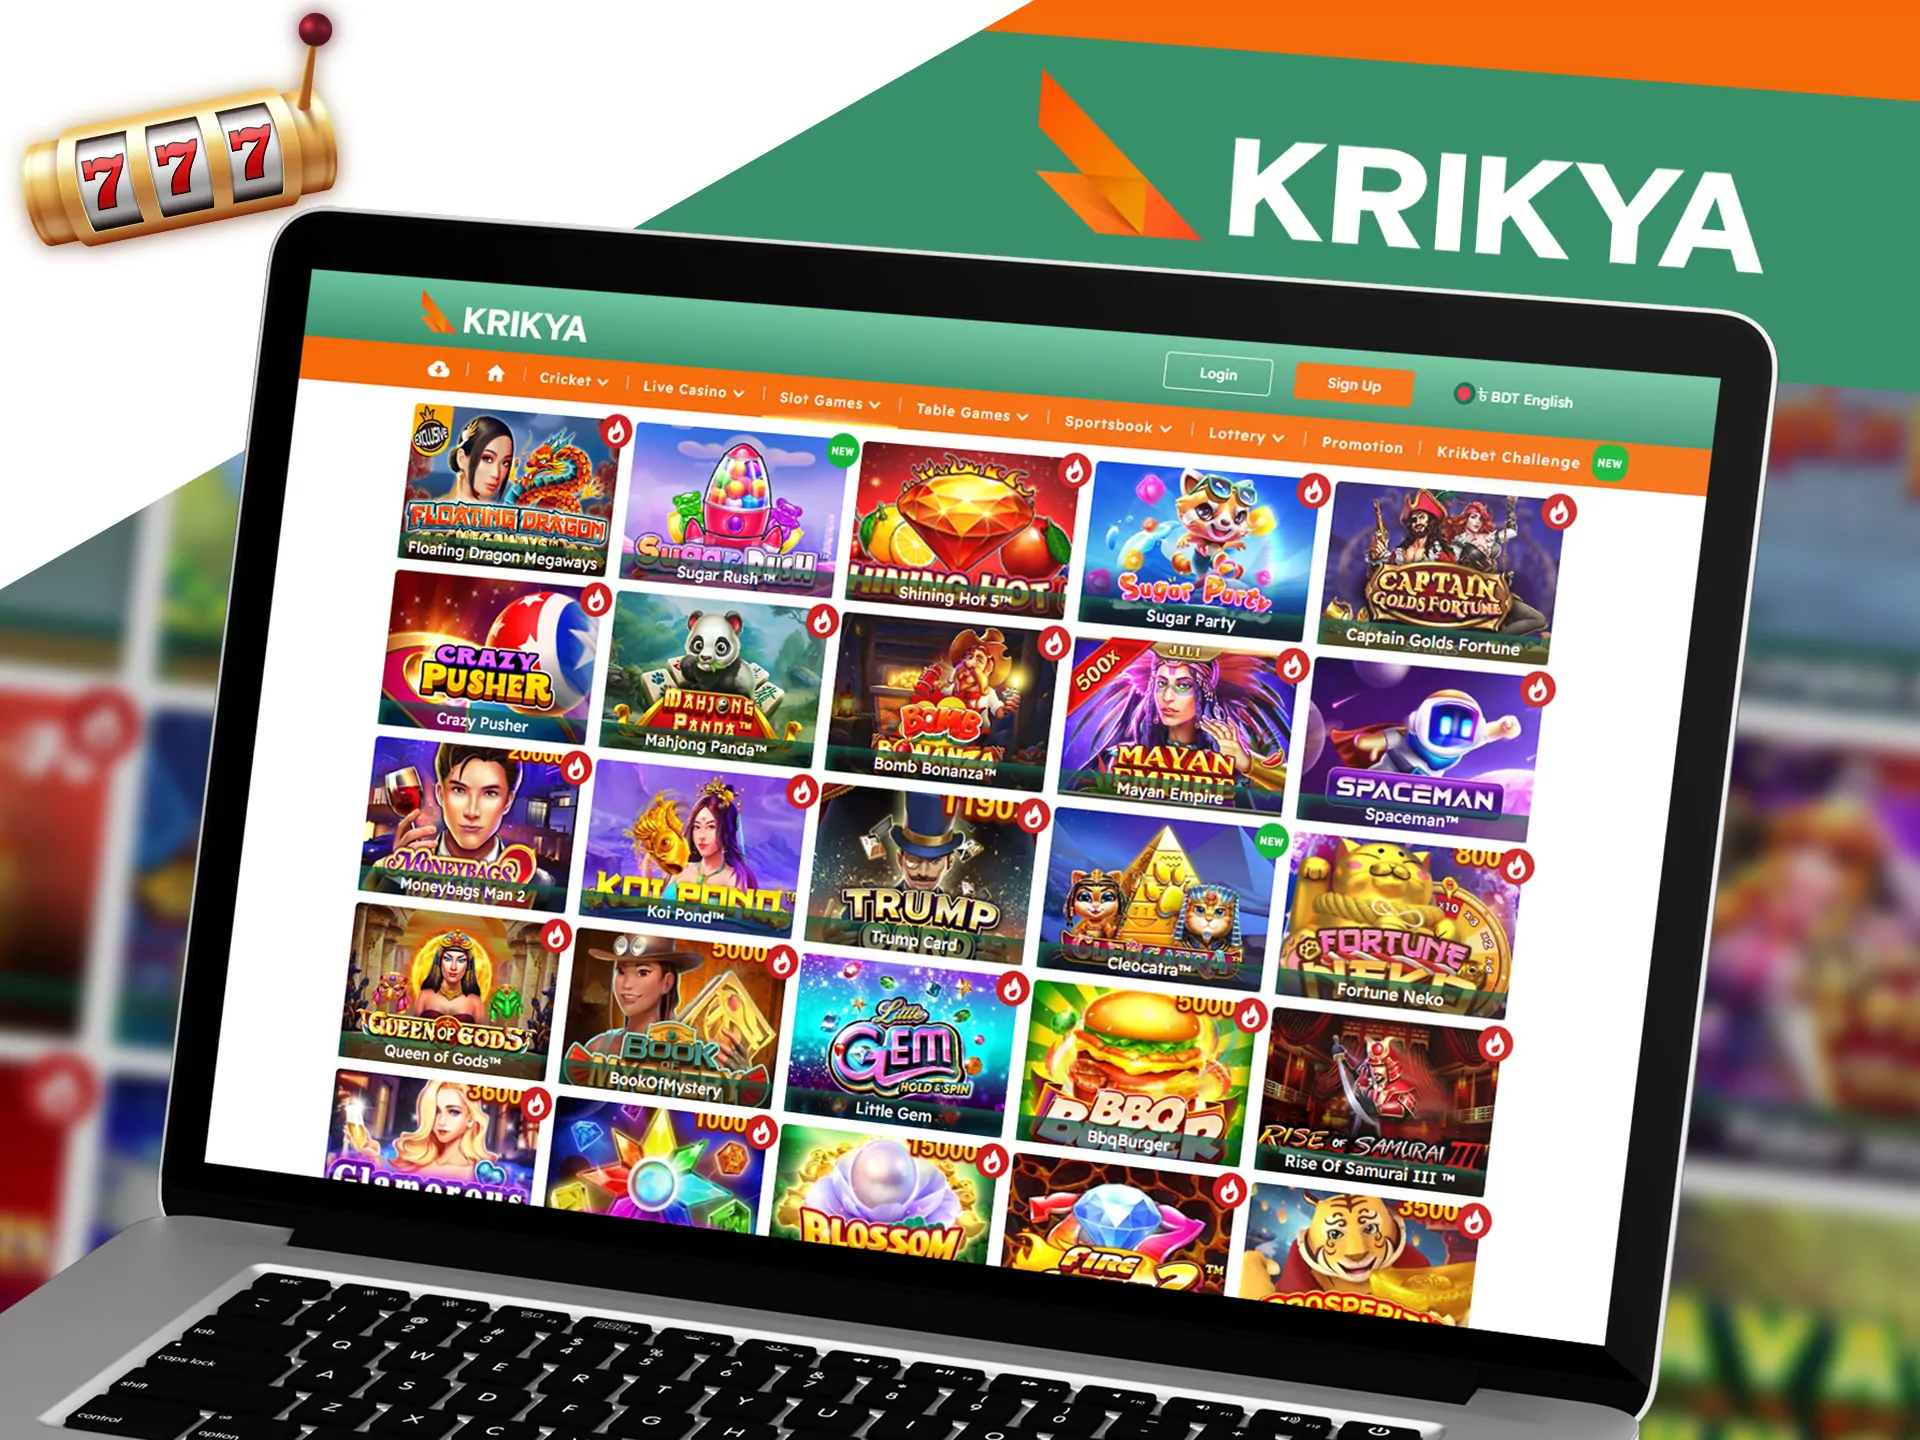 Choose your favourite slots to play at Krikya.